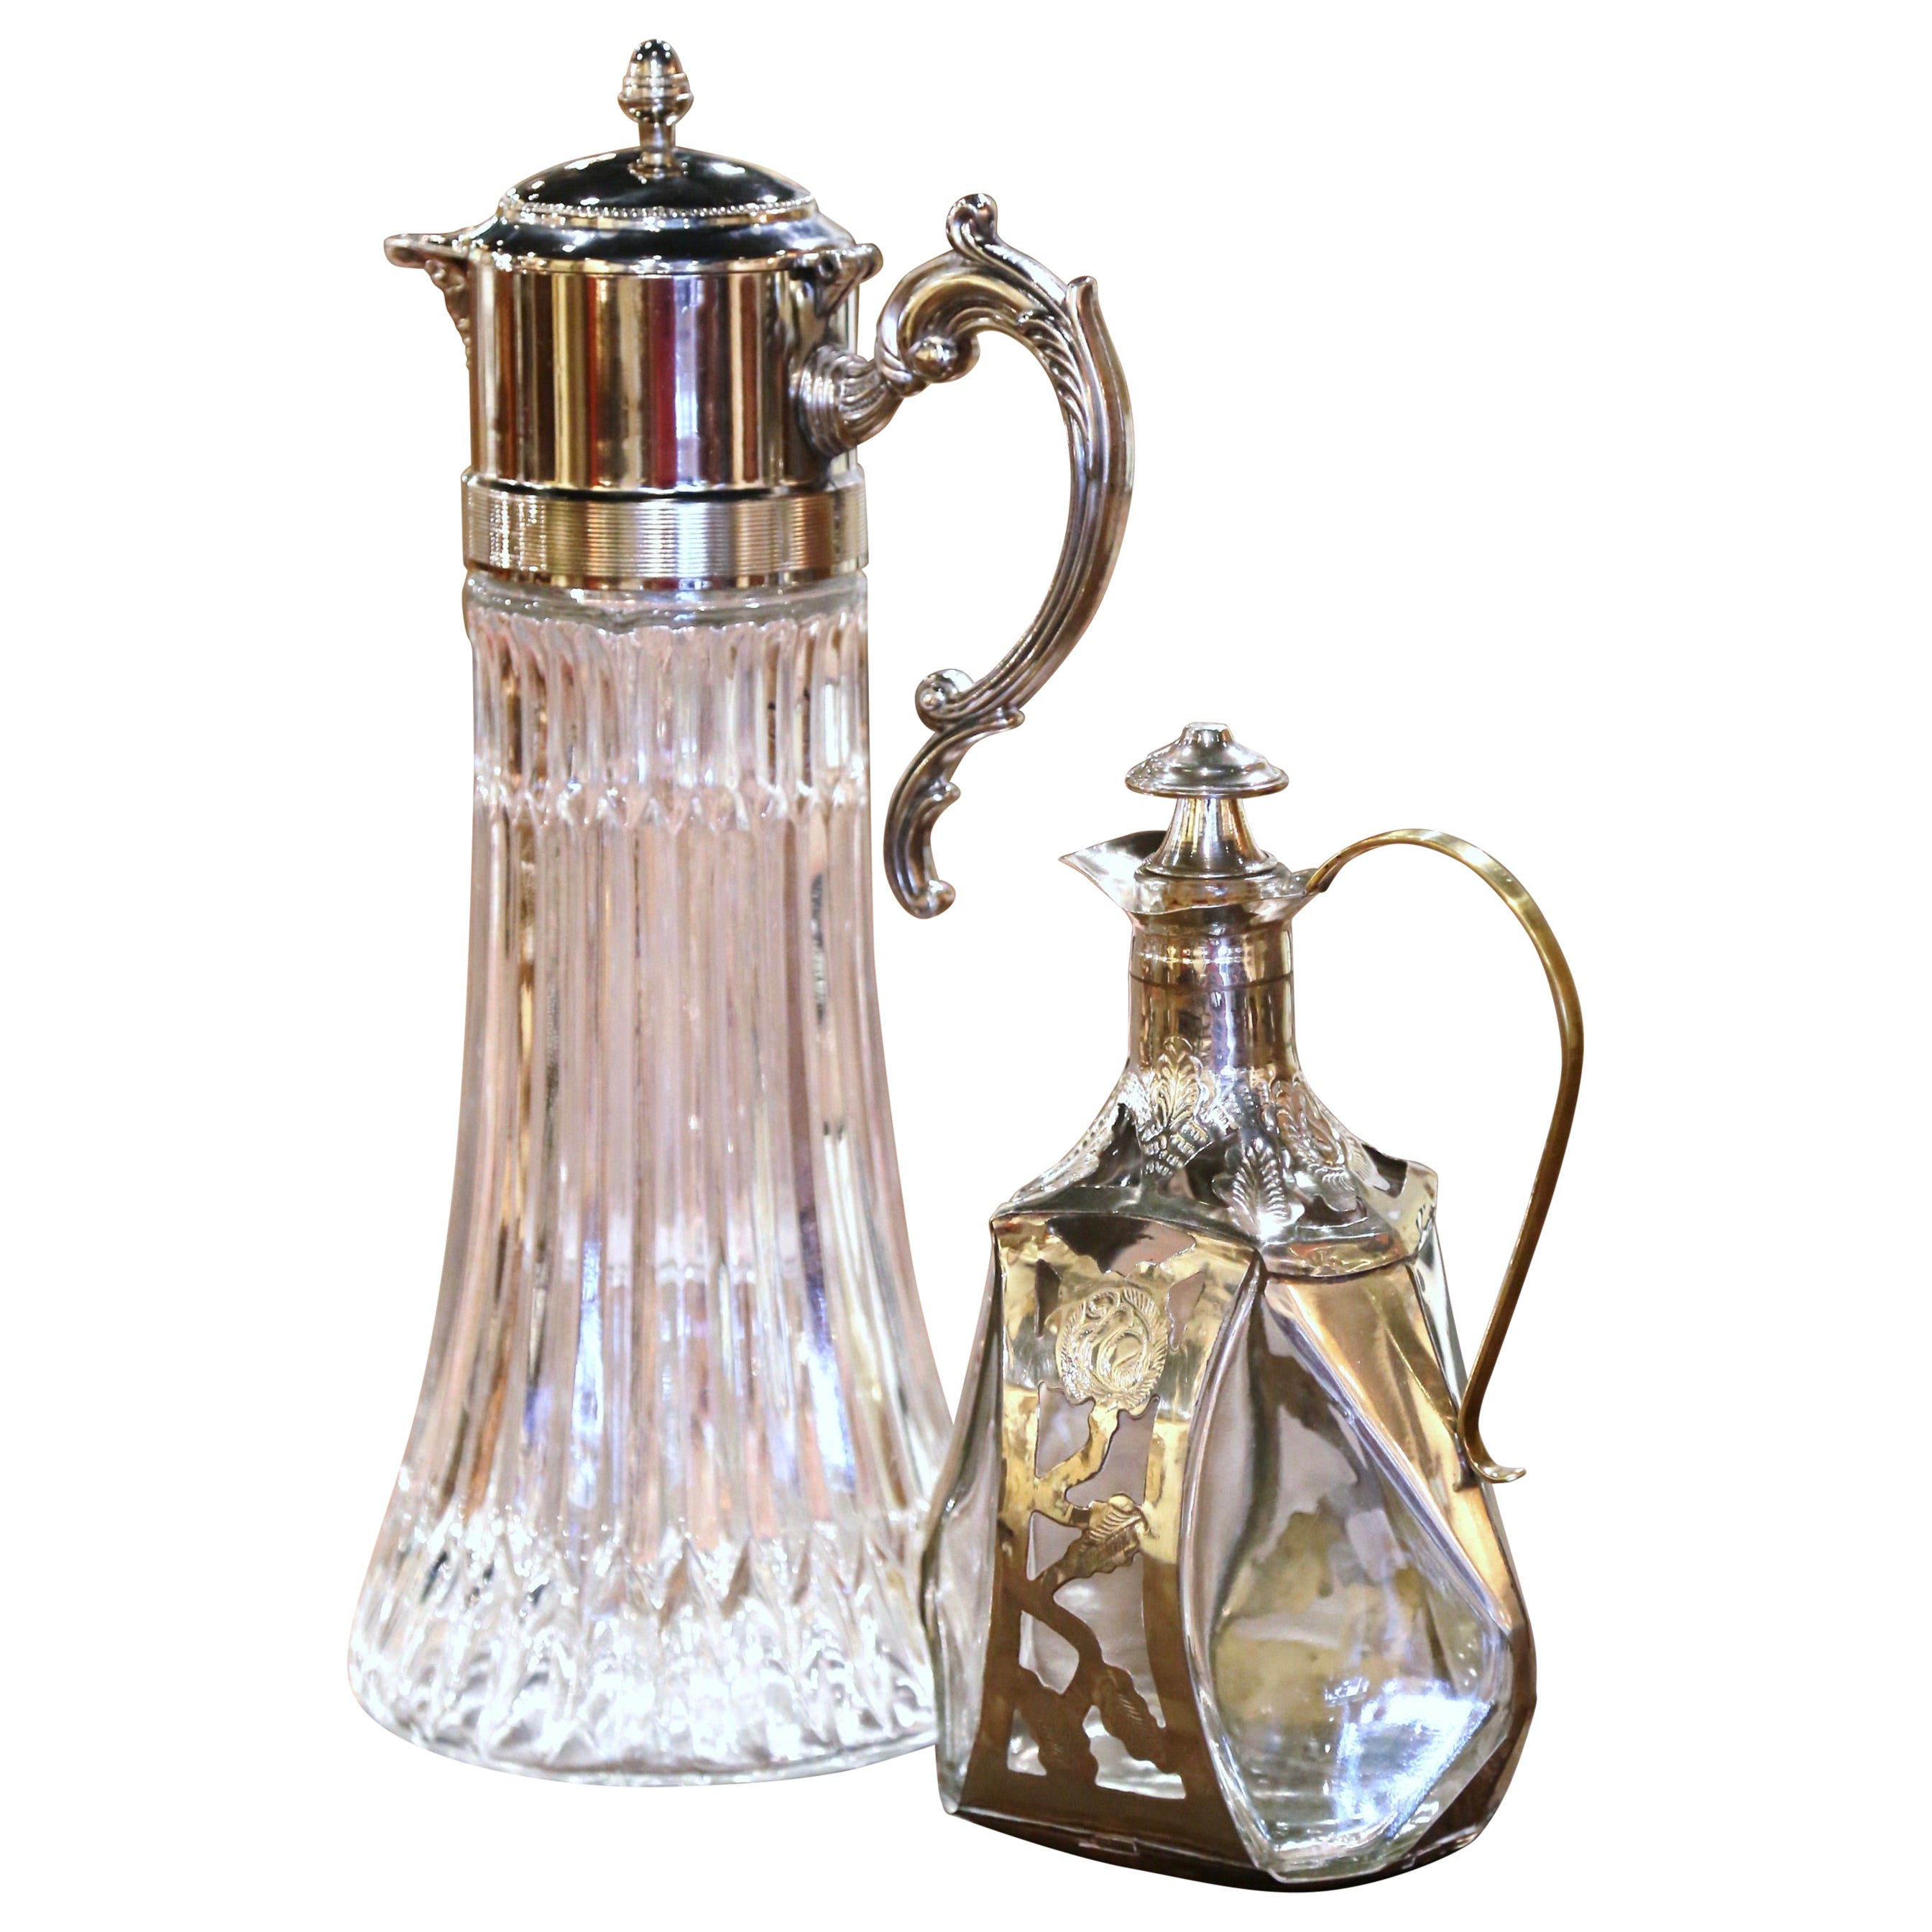 Early 20th Century French Silver Plated Crystal Claret Pitcher and Decanter Set